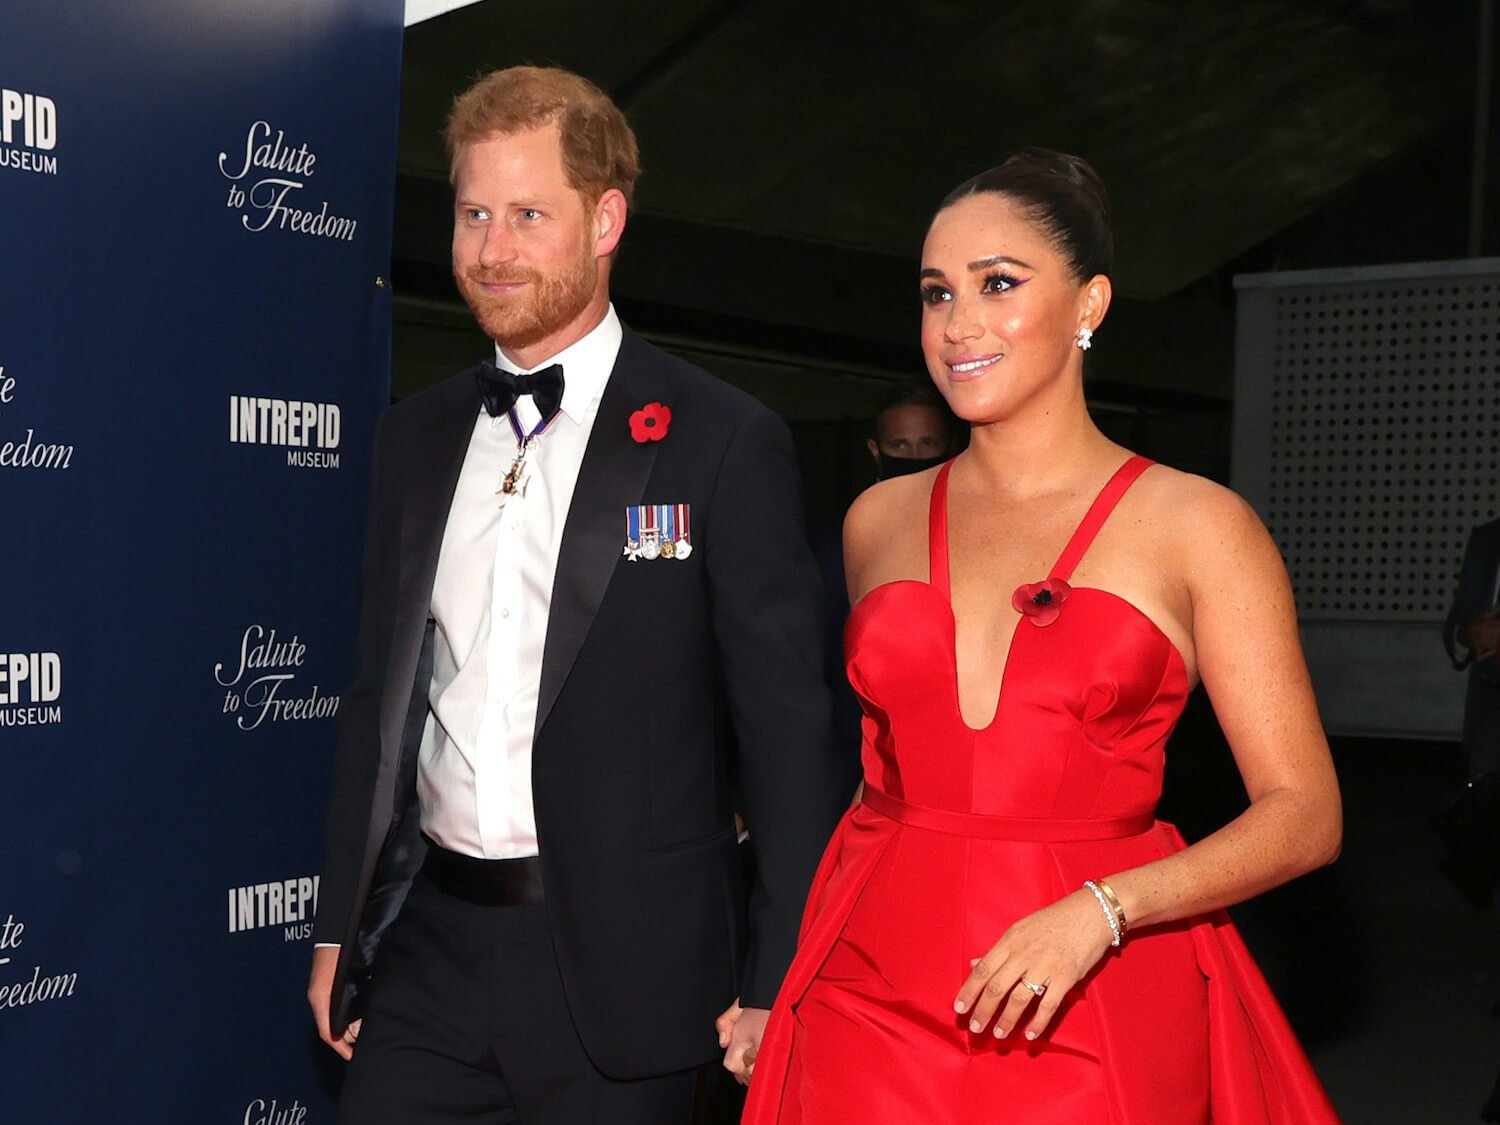 Prince Harry and Meghan Markle compatible based on their astrological signs expert says